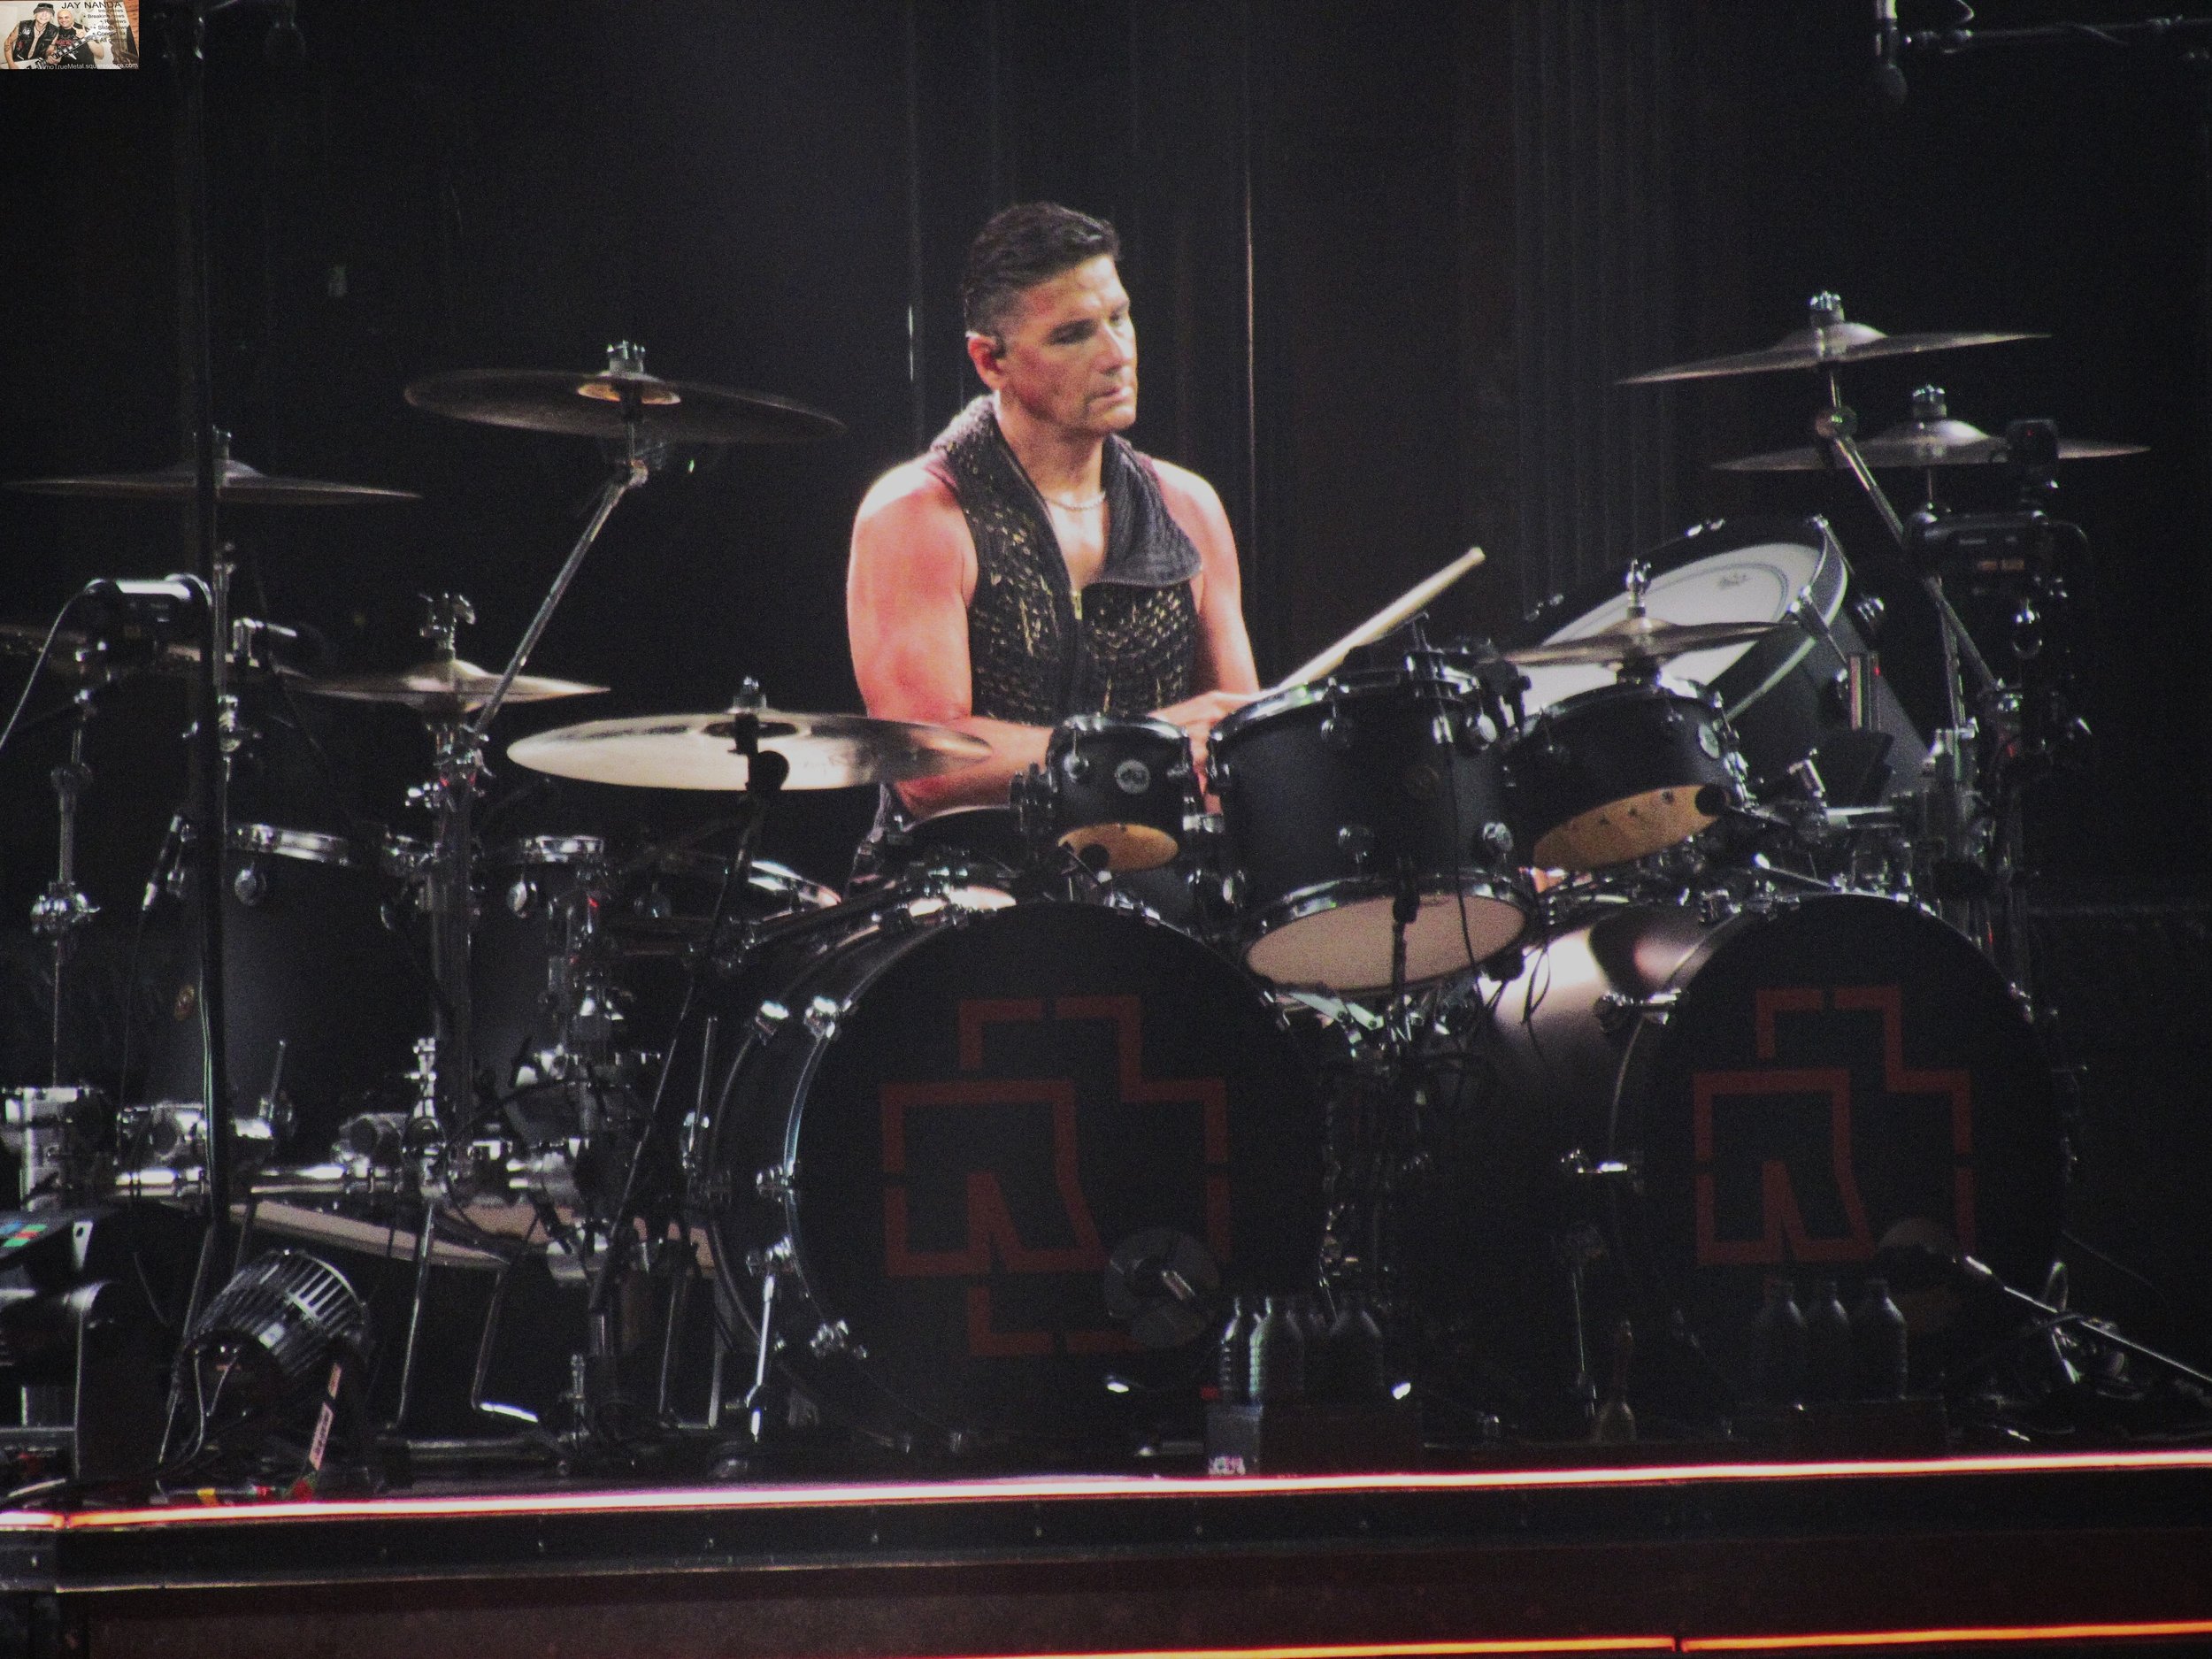  Christoph Schneider is one of Rammstein’s six original members in a band that has never changed its roster since forming in 1994. 